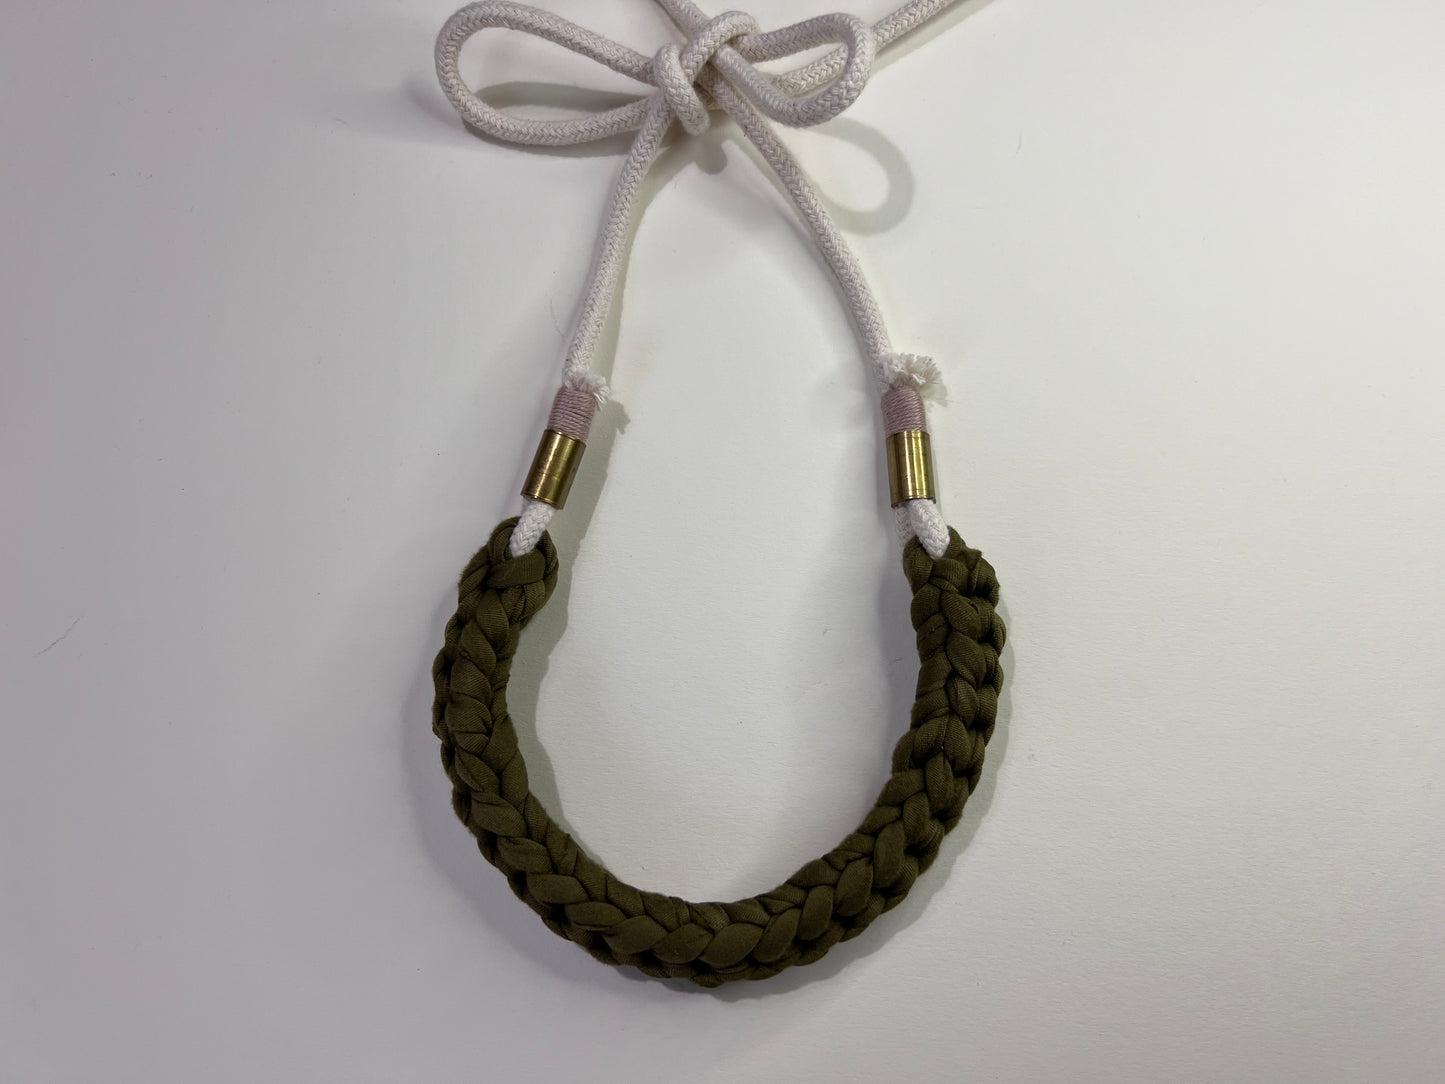 Crocheted olive green necklace